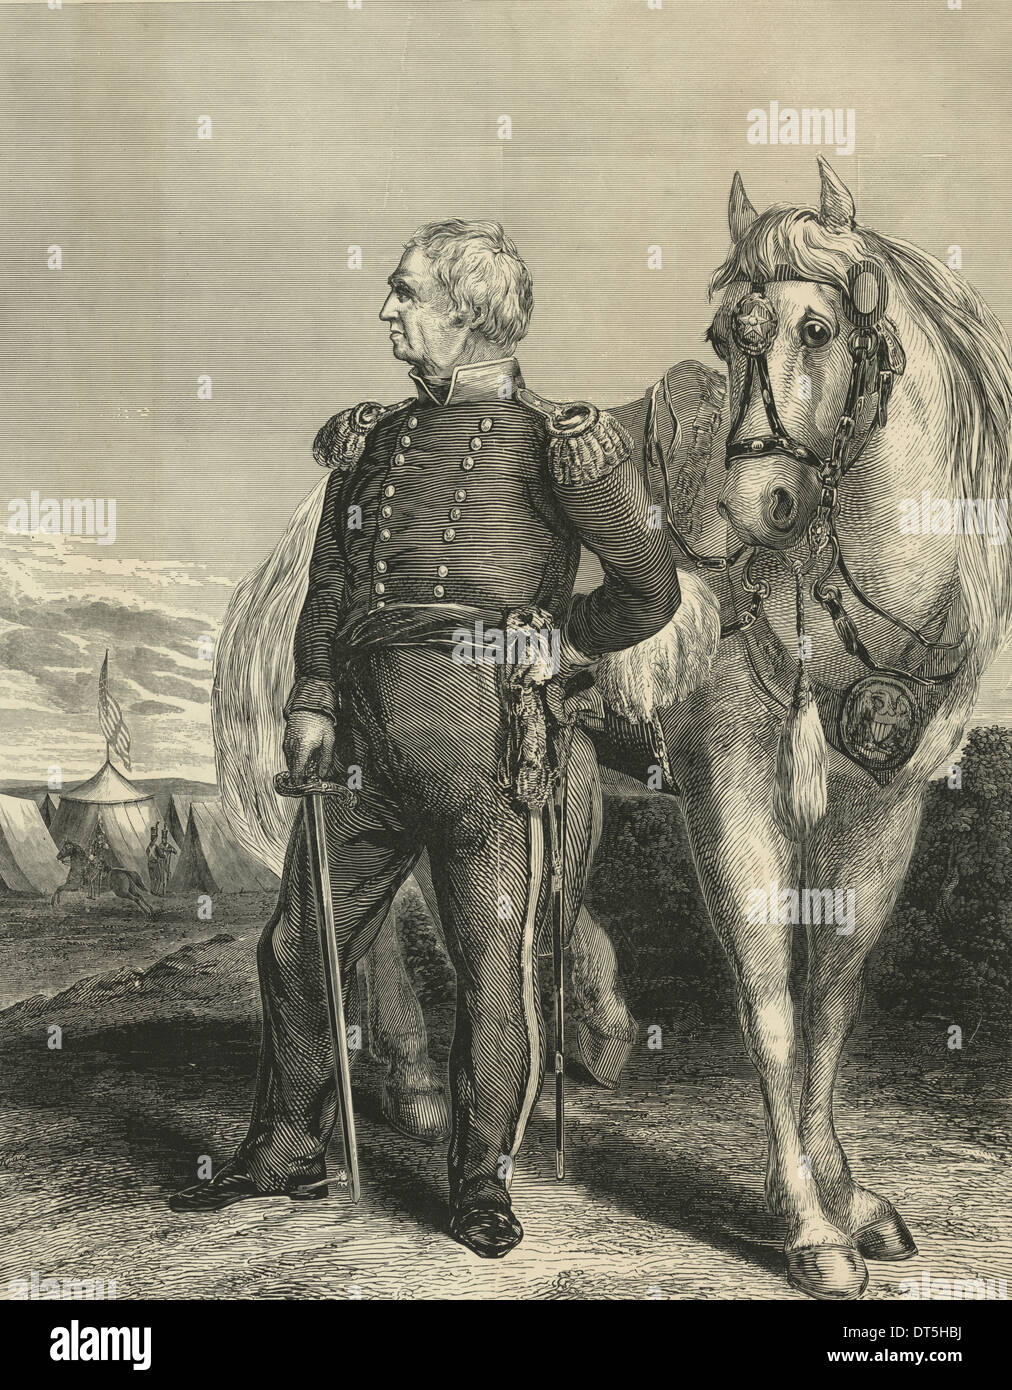 Major General Zachary Taylor - full-length standing portrait of Mexican War hero Zachary Taylor. Although issued in 1847, this poster-sized woodcut was probably designed with the 1848 U.S. presidential campaign in mind. Stock Photo